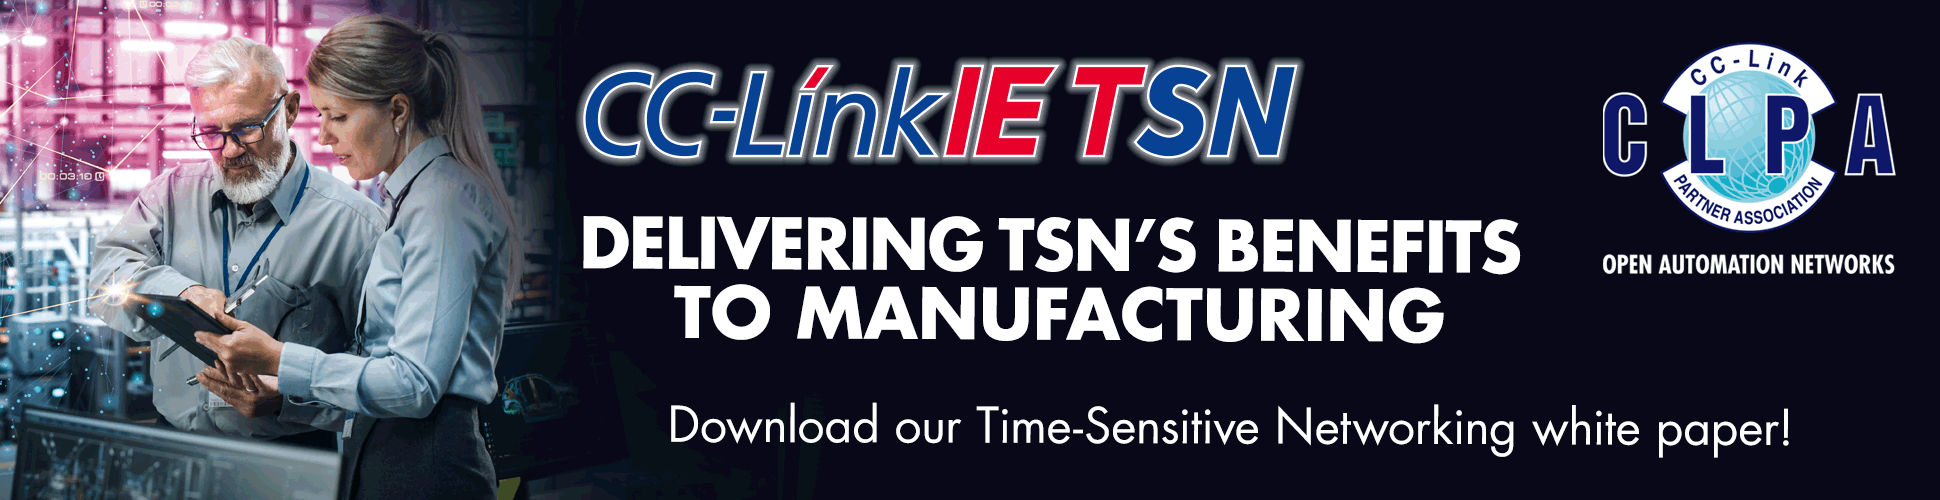 CLPA Banner - Delivering TSN's benefits to manufacturing